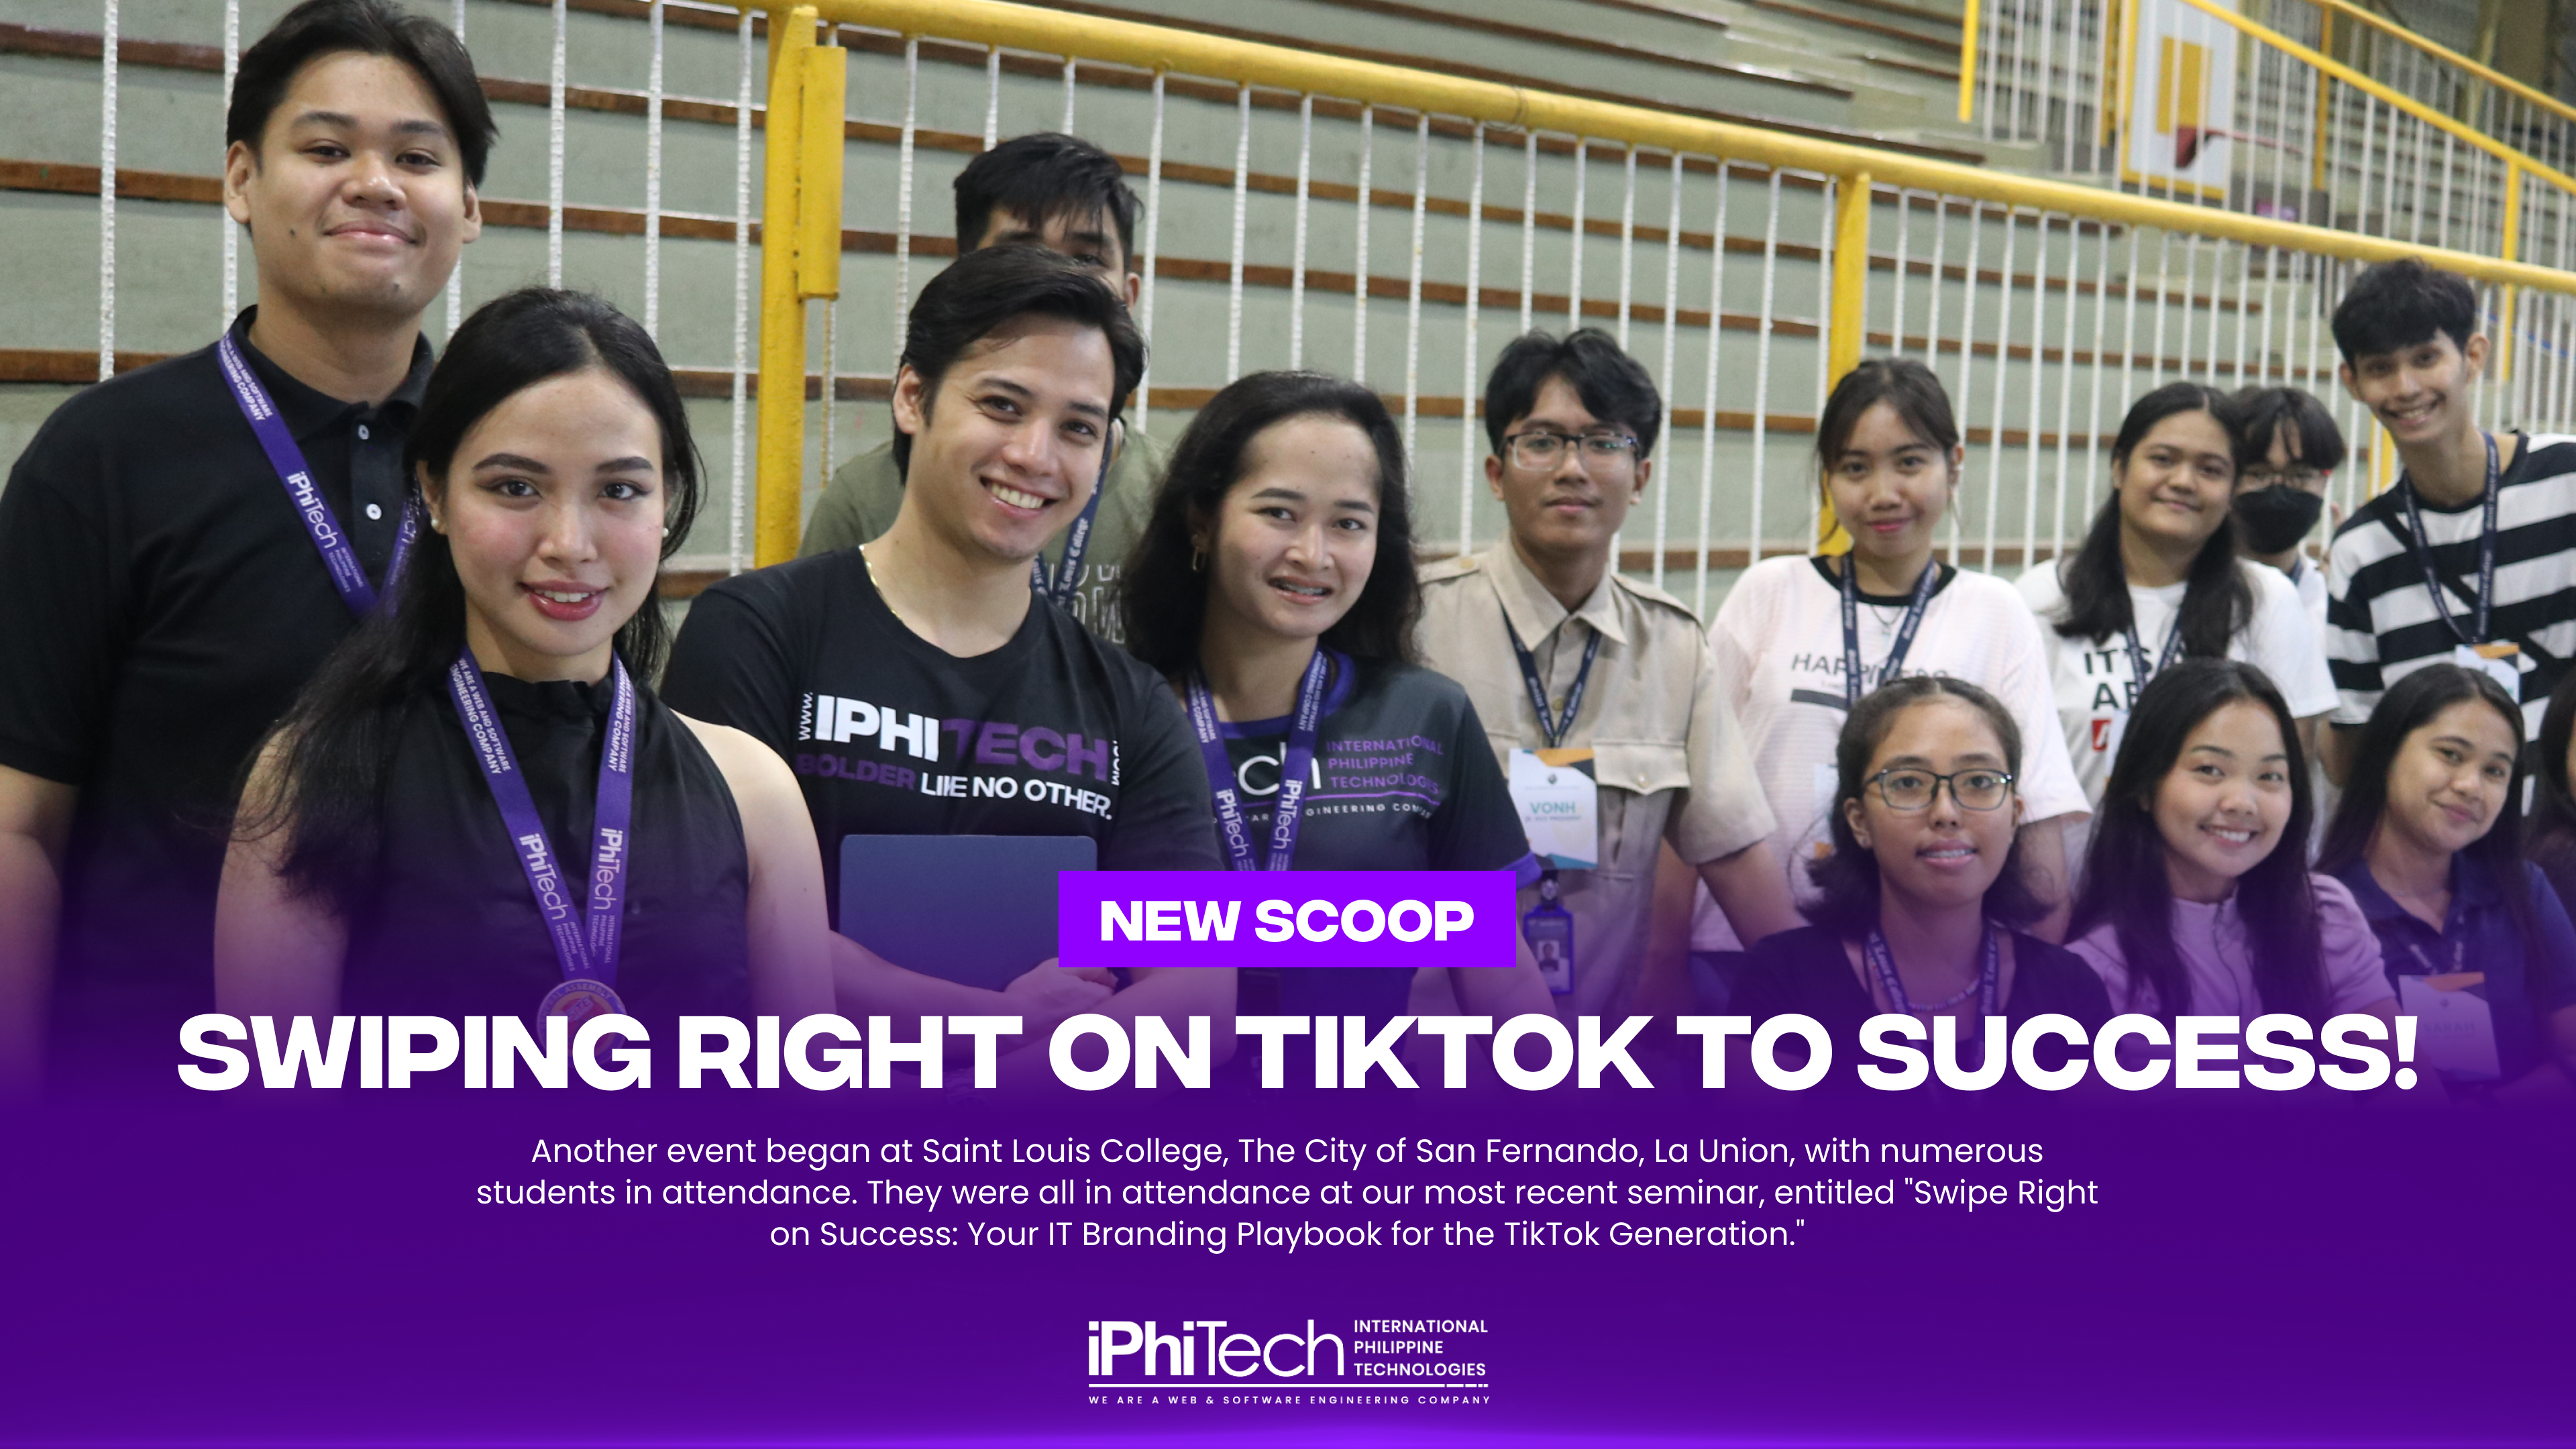 Your IT Branding Playbook for the TikTok Generation hosted by iPhiTech at Saint Louis College, San Fernando La Union